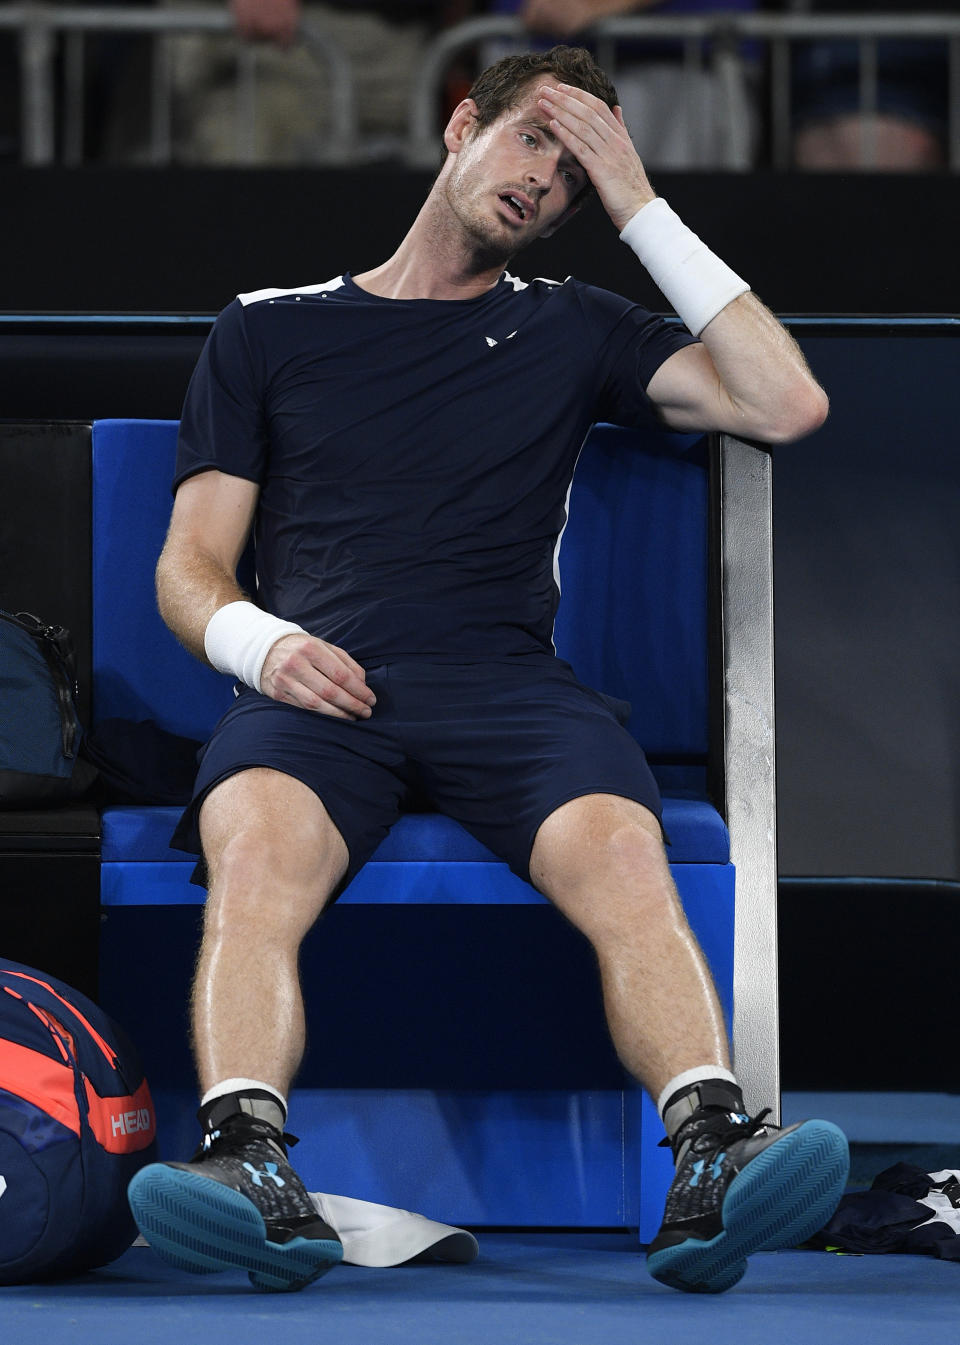 FILE - In this Monday, Jan. 14, 2019 file photo Britain's Andy Murray reacts after his first round loss to Spain's Roberto Bautista Agut at the Australian Open tennis championships in Melbourne, Australia. Former world number one Murray's participation at the upcoming Australian Open is in doubt after the Briton tested positive for COVID-19. (AP Photo/Andy Brownbill, File)